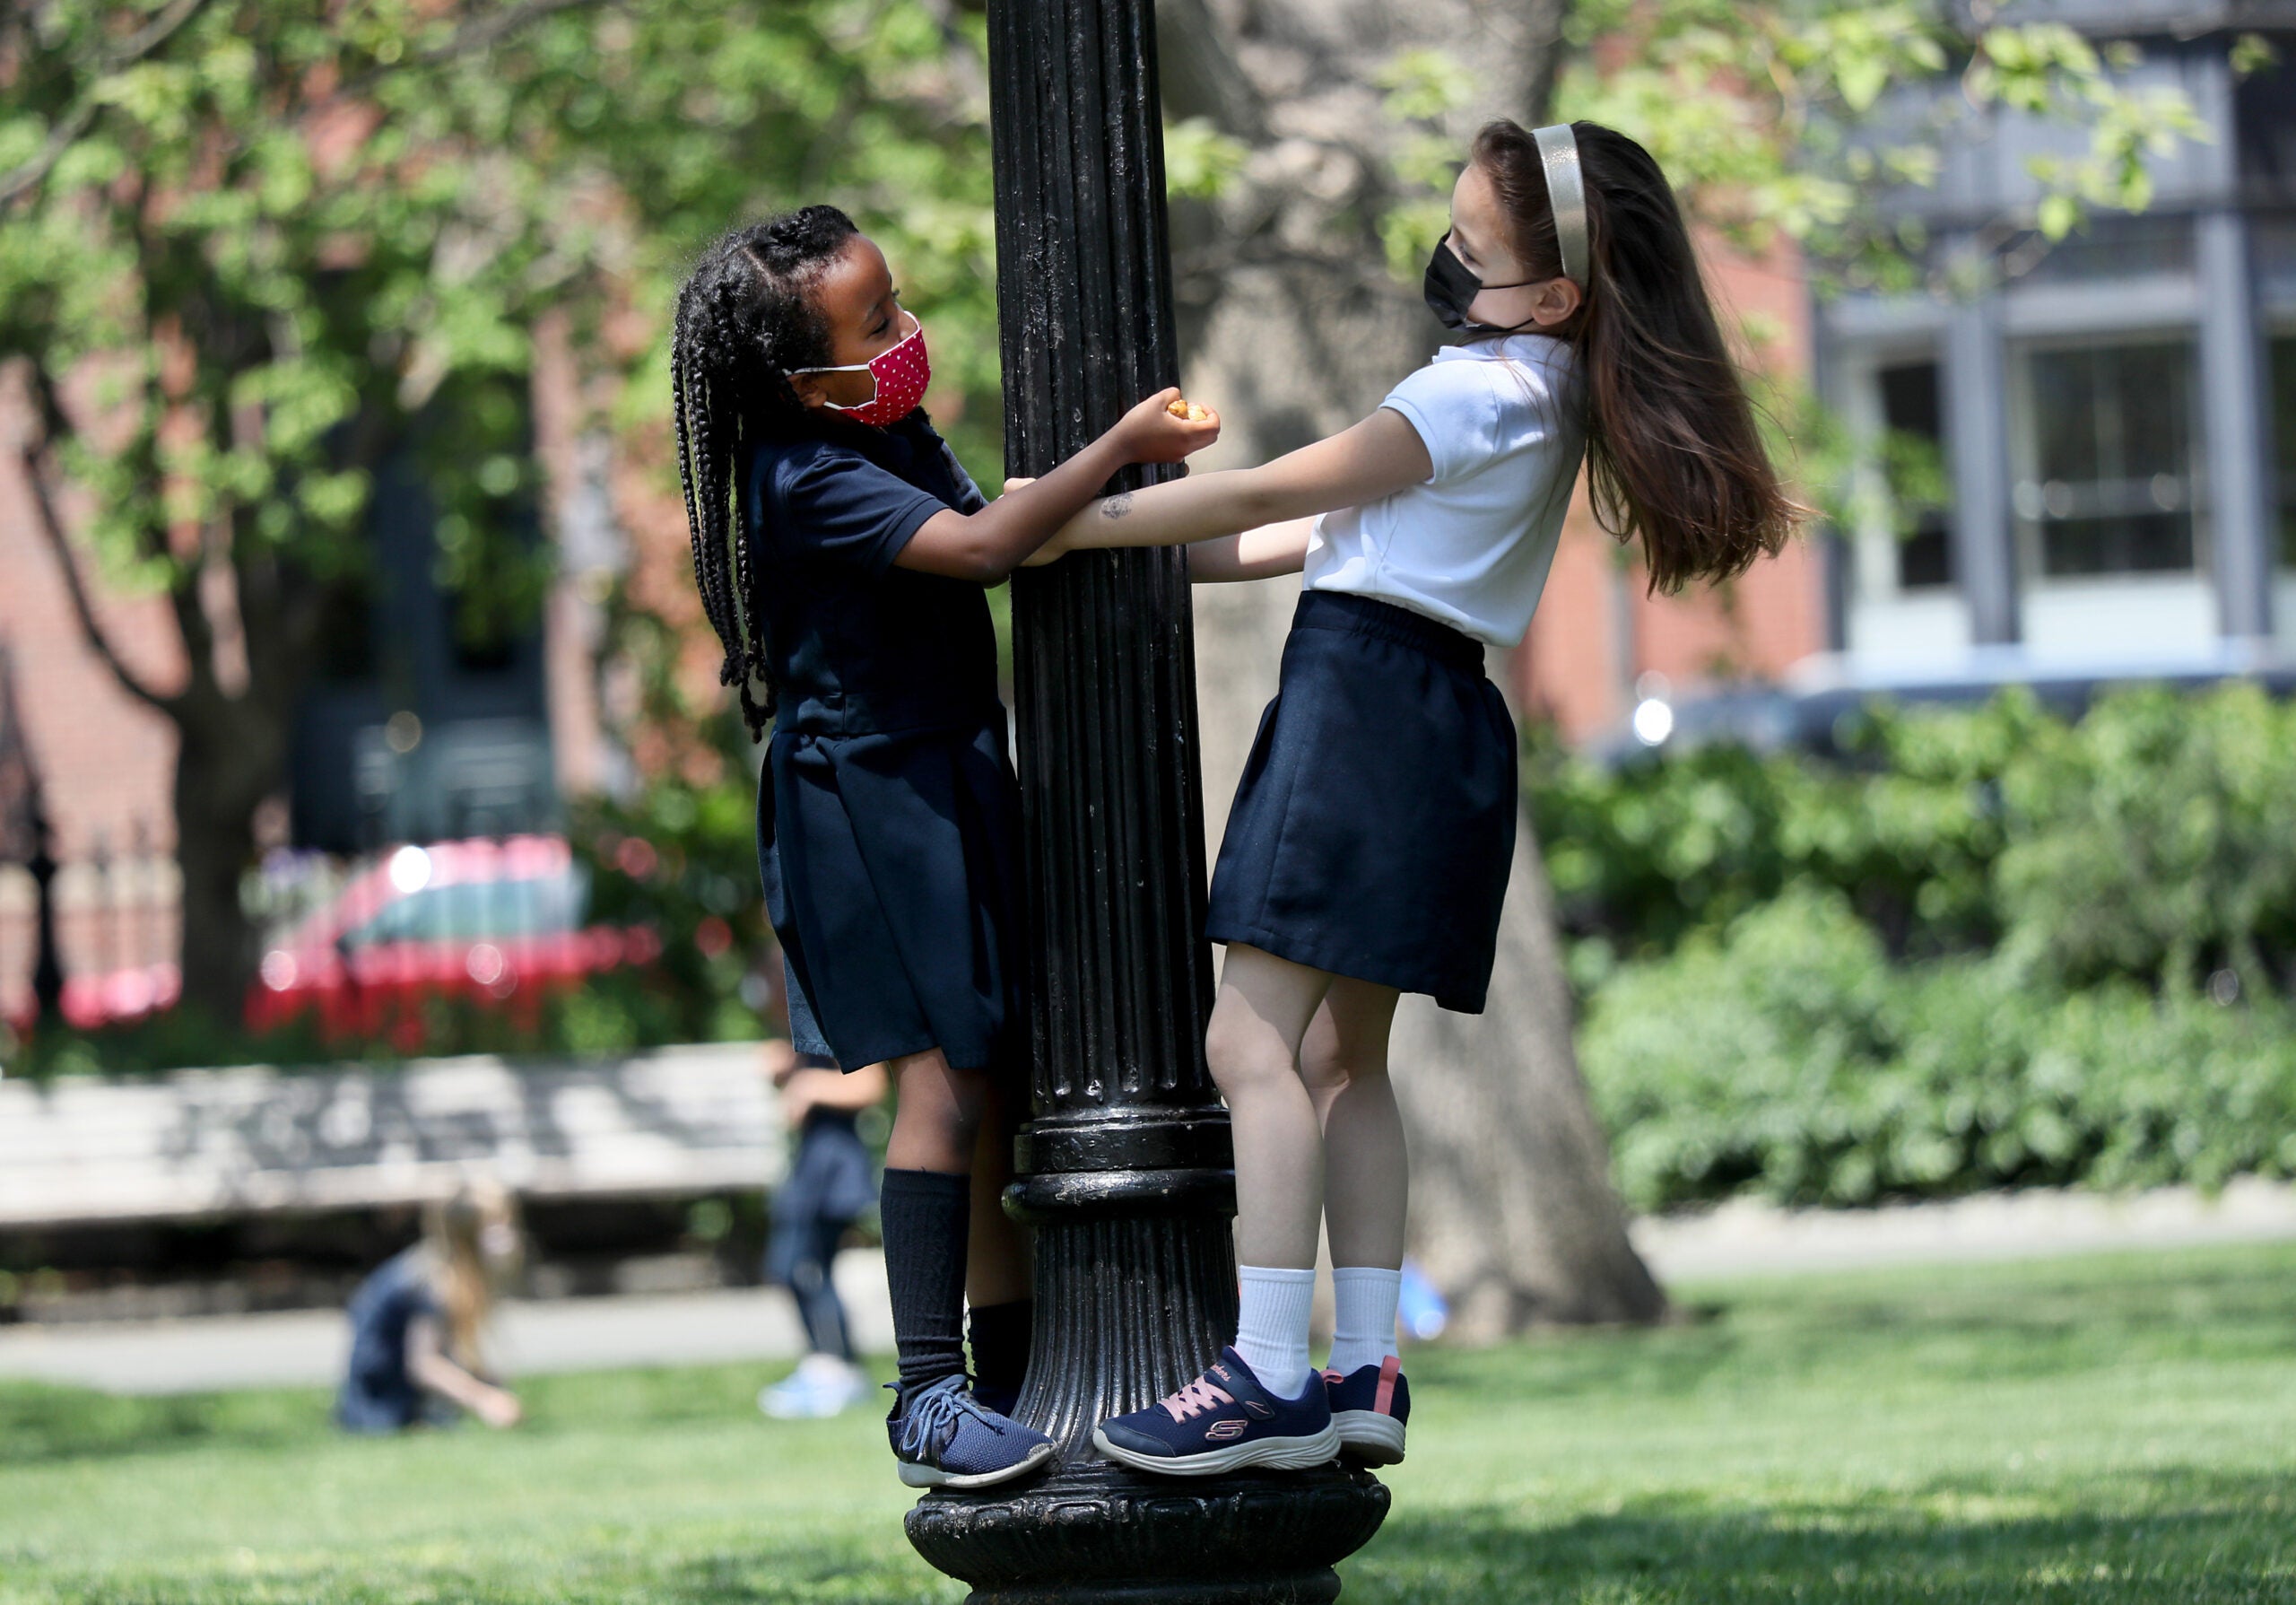 Boston weather , MA - 5/19/2021: Kindergartners from the Park Street School, Michaela Afework, left, and Tesla Long, played on a lamp post in the warm spring weather.